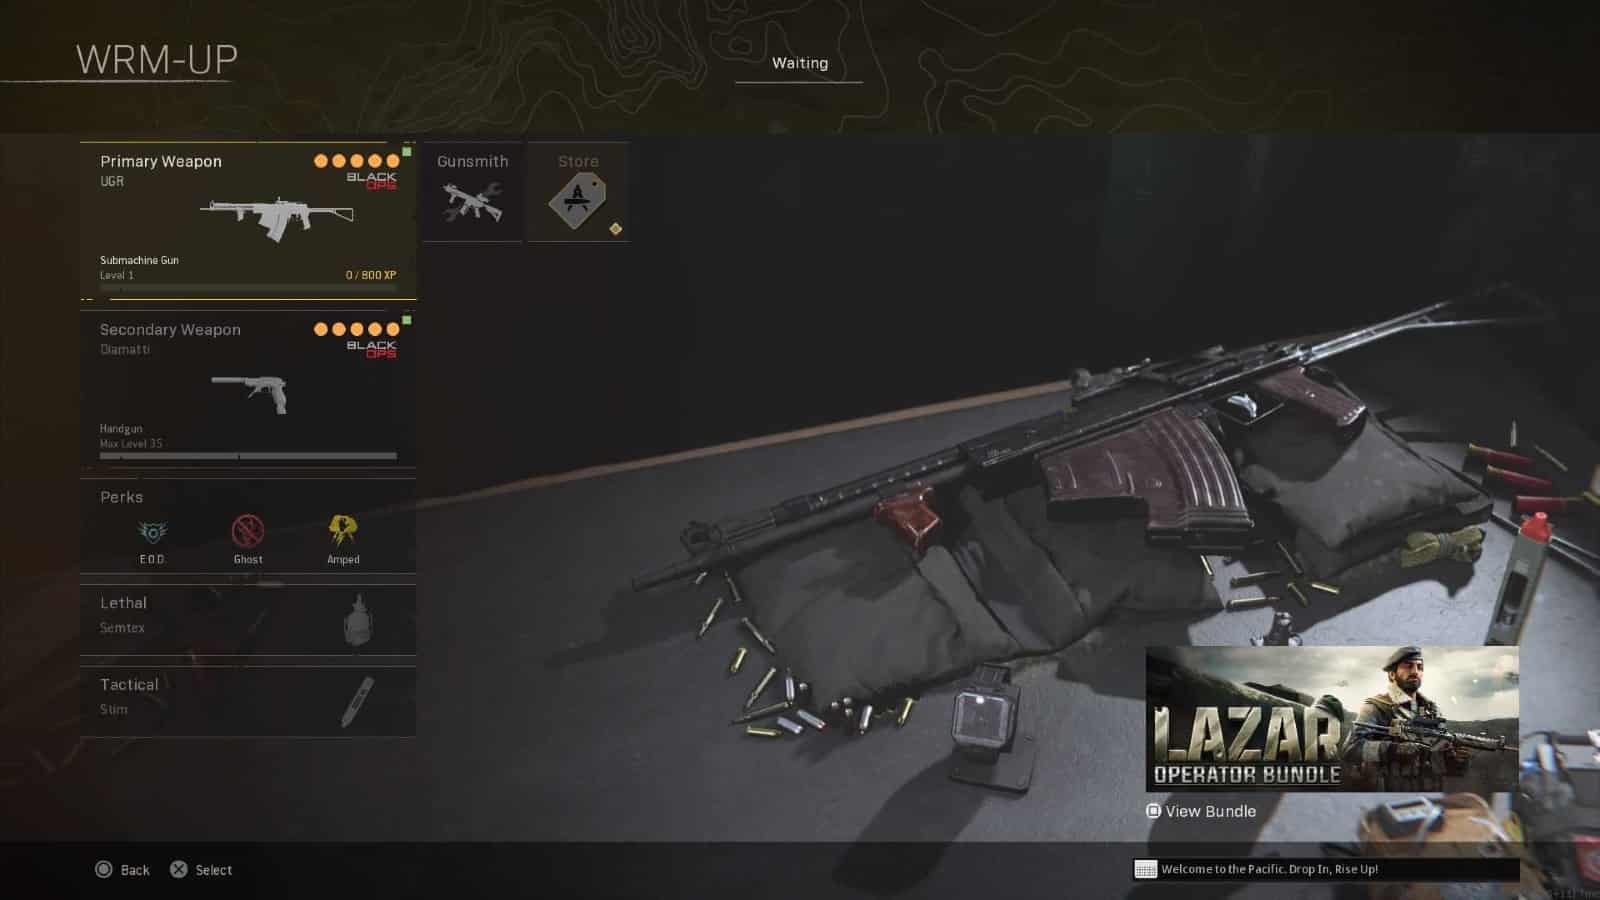 The UGR's best class loadout in Warzone